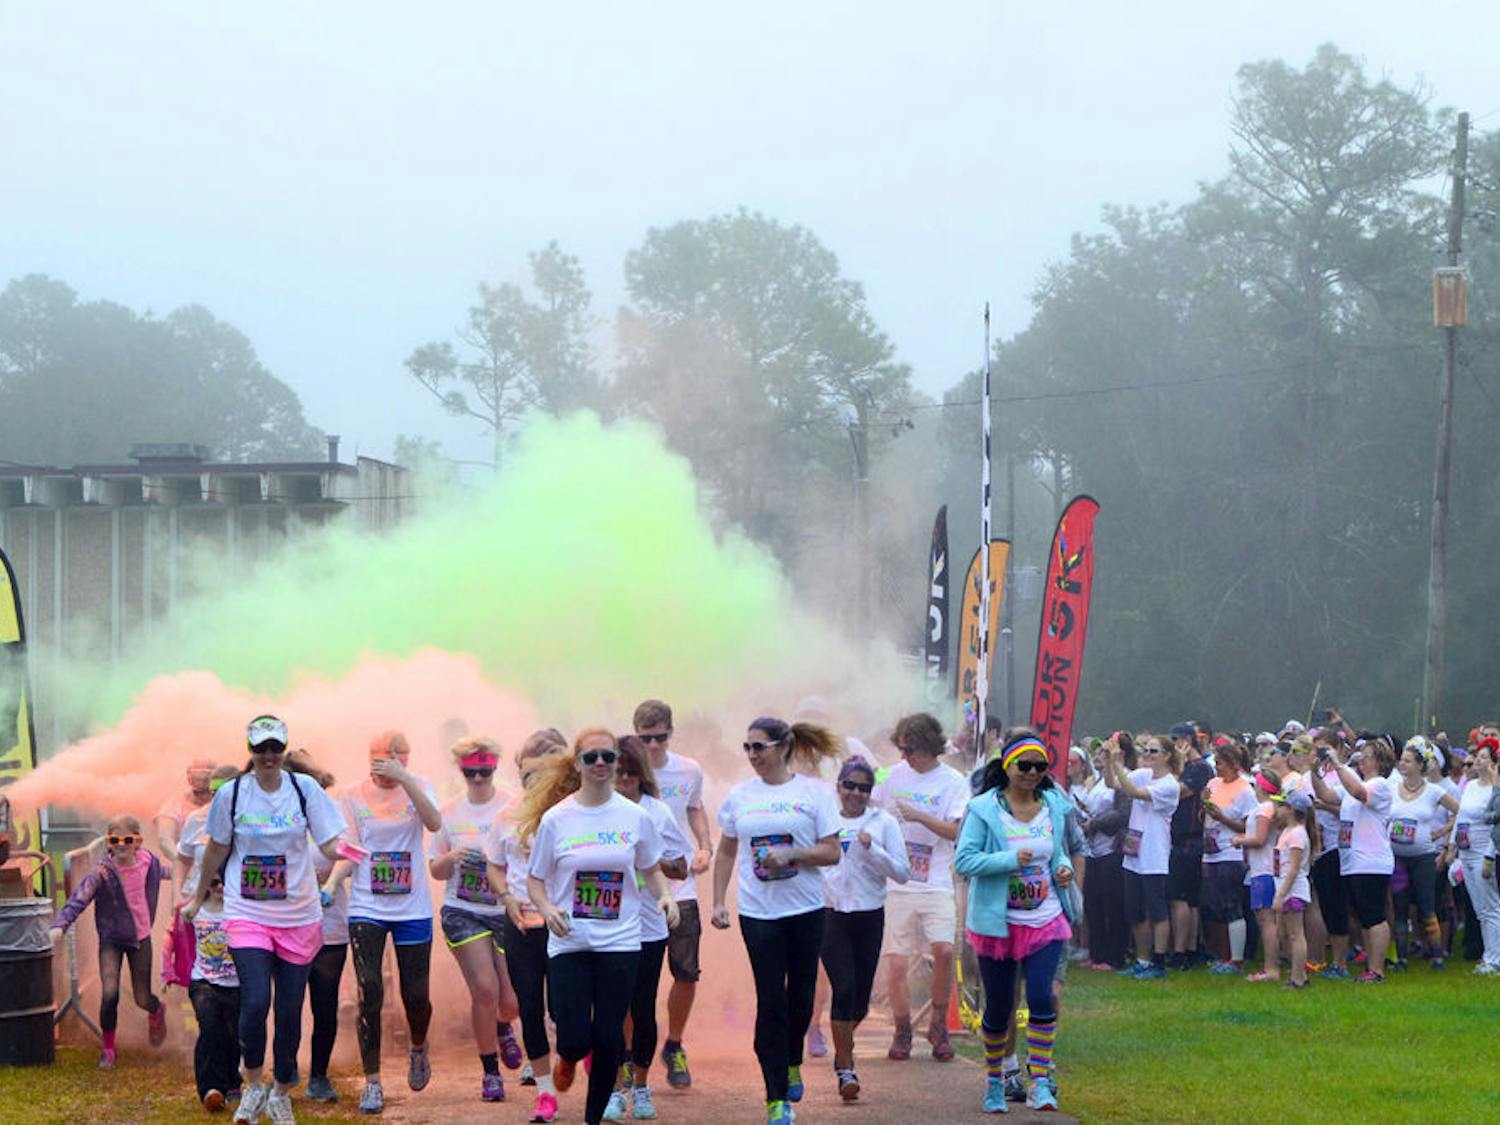 The second wave of runenrs take off from the starting line on Jan. 16, 2016, at the Alachua County Fairgrounds during the Color In Motion 5K run.